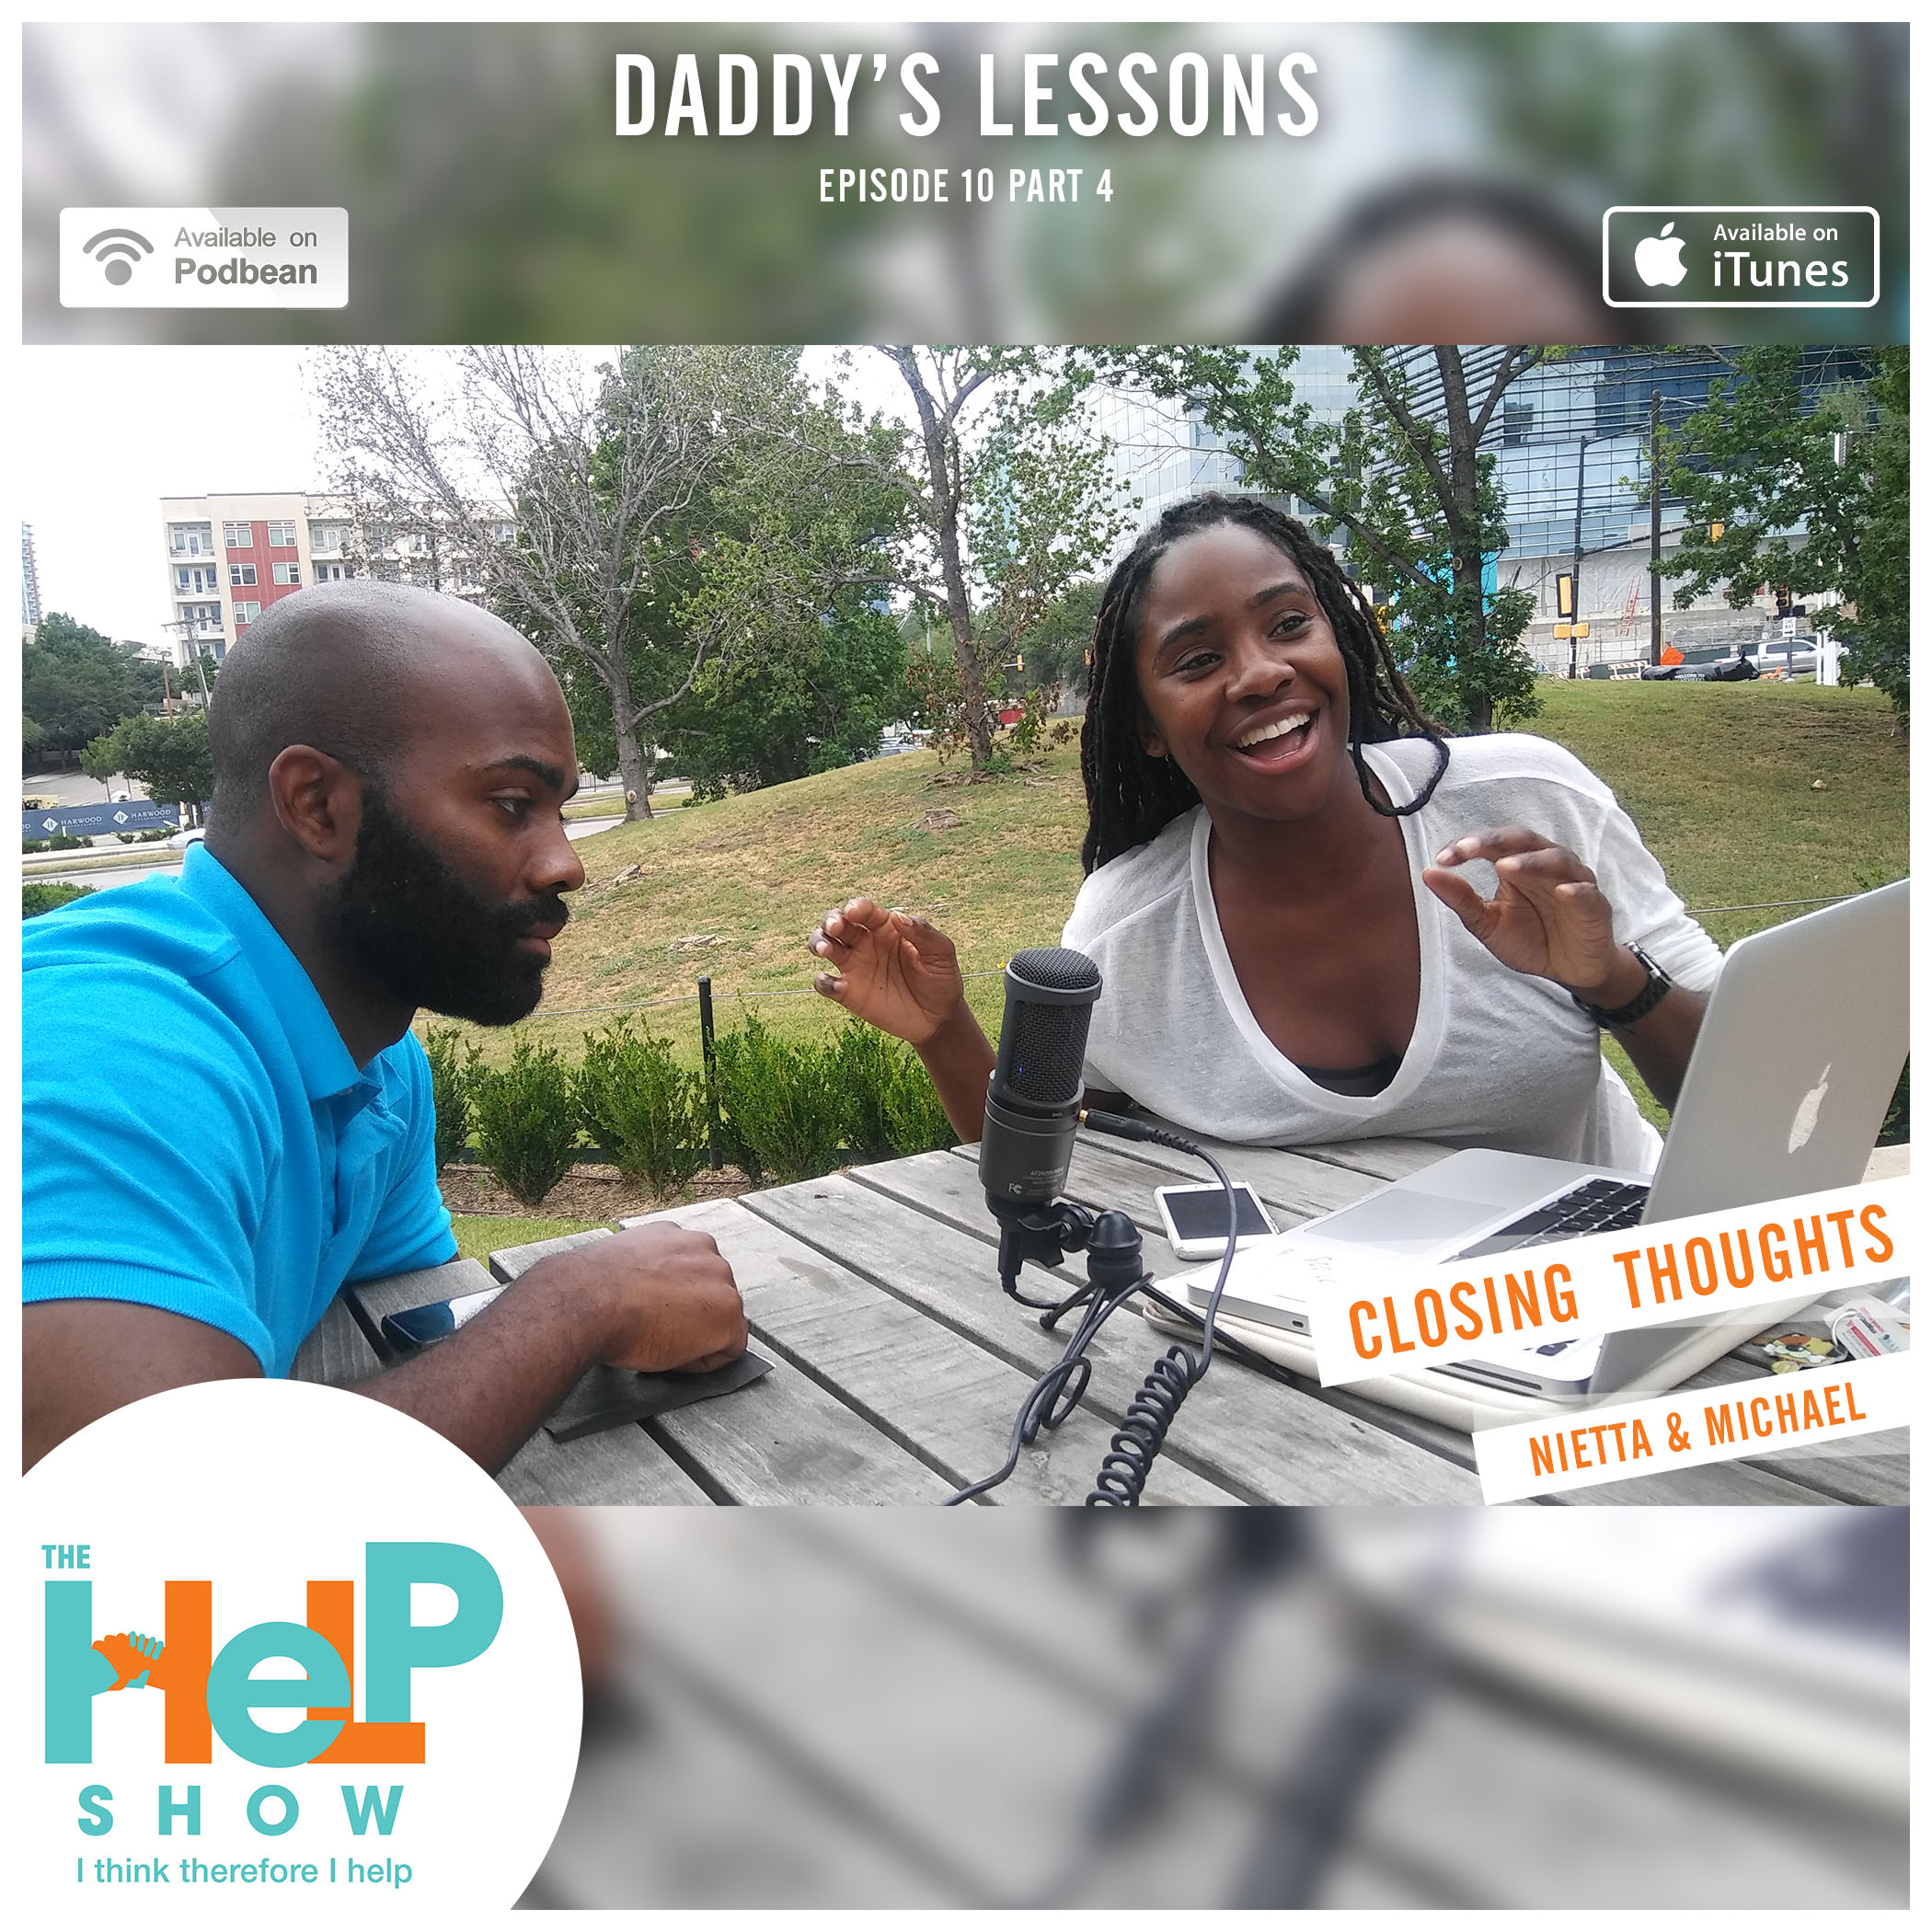 Daddy’s Lessons (Episode 10: Part4) Closing Thoughts with Michael & Nietta